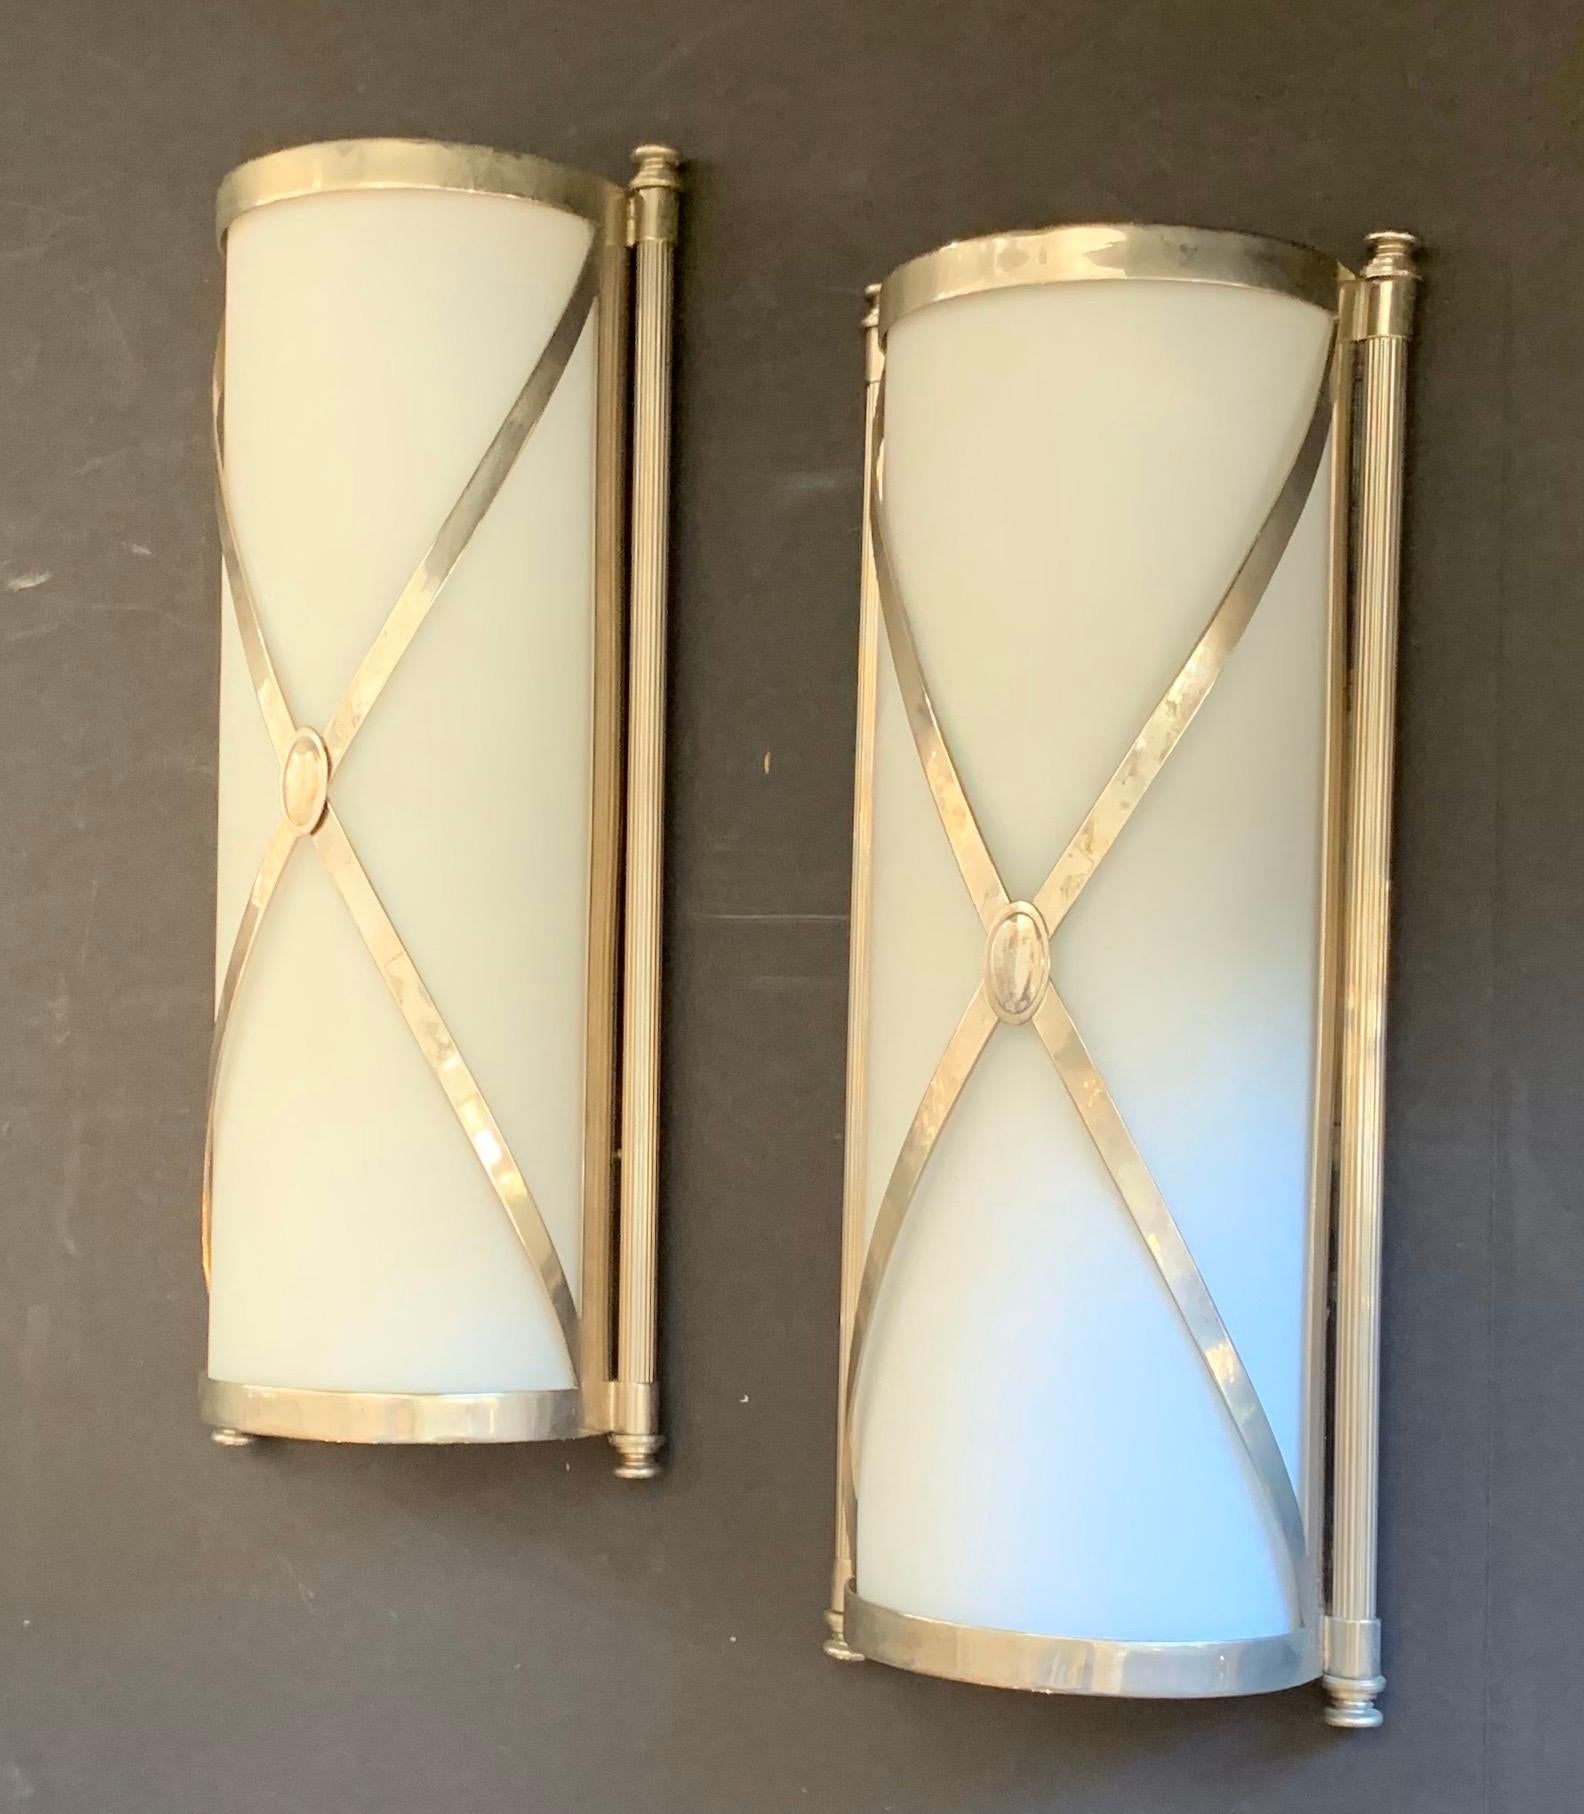 A wonderful pair of Empire / neoclassical silvered bronze and frosted glass Caldwell style sconces each with 2 Edison bulbs rewired to work in damp spaces.